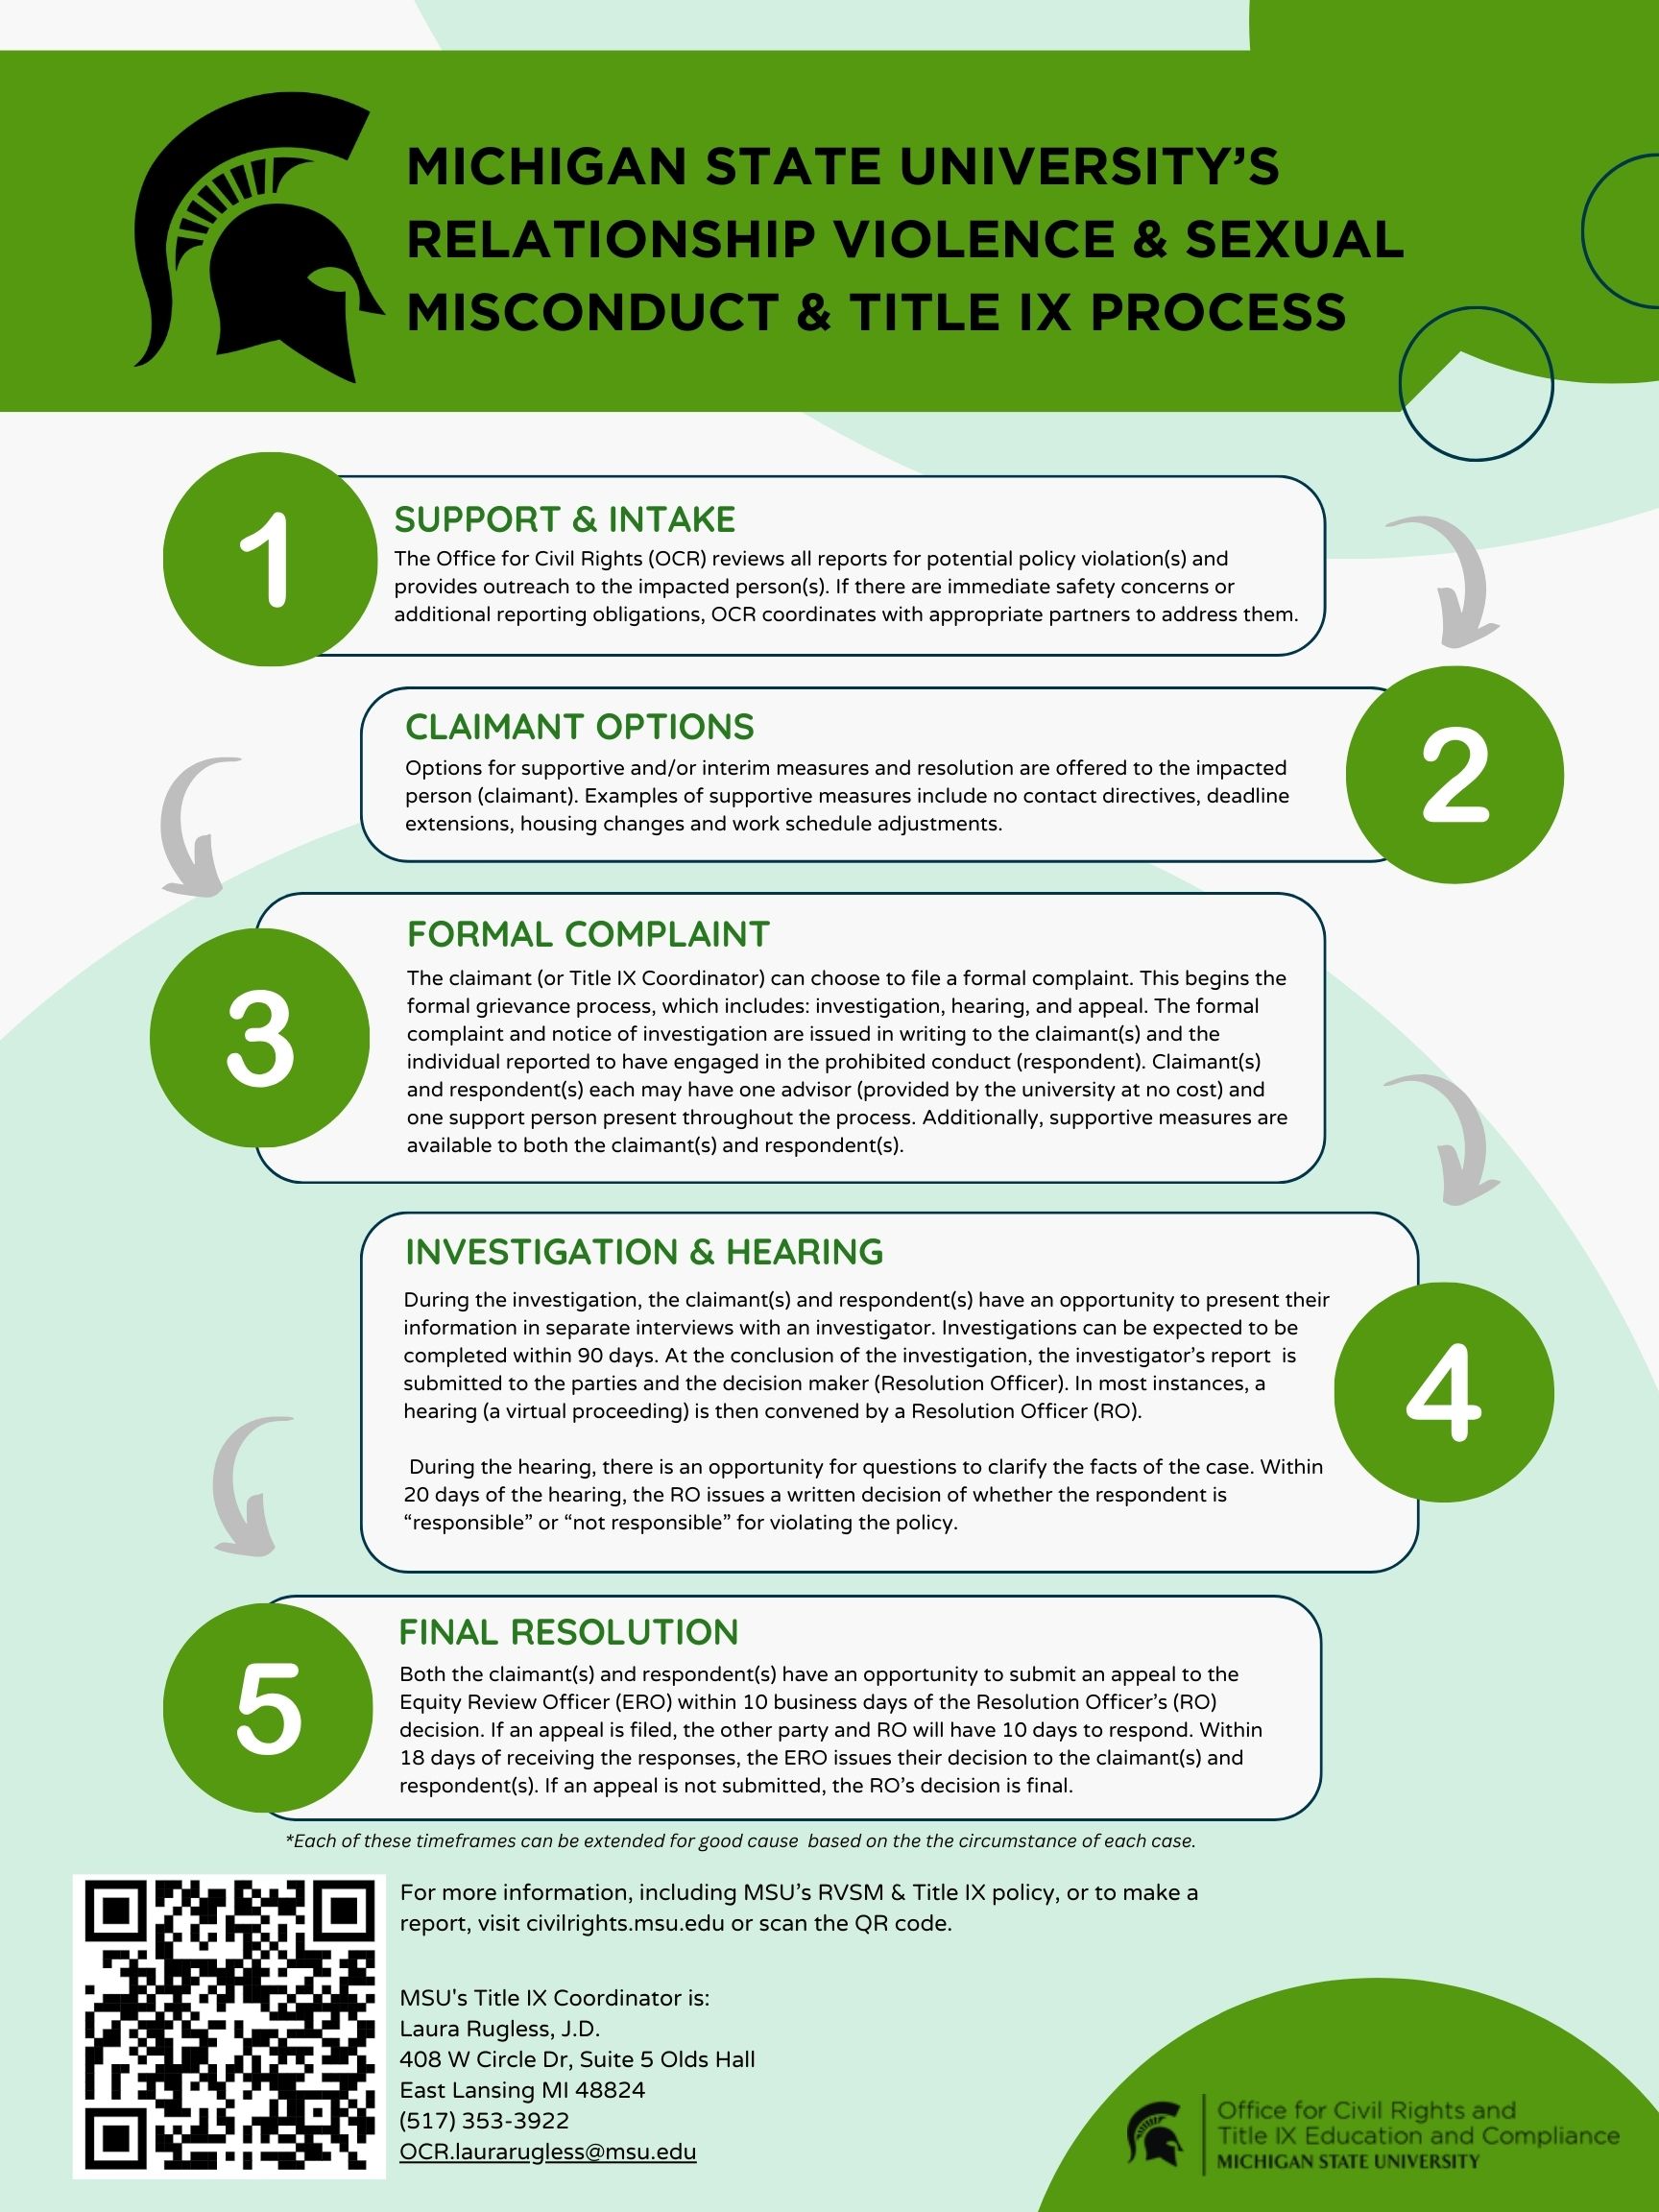 MSU RVSM and Title IX process infographic. Accessible version available for download.